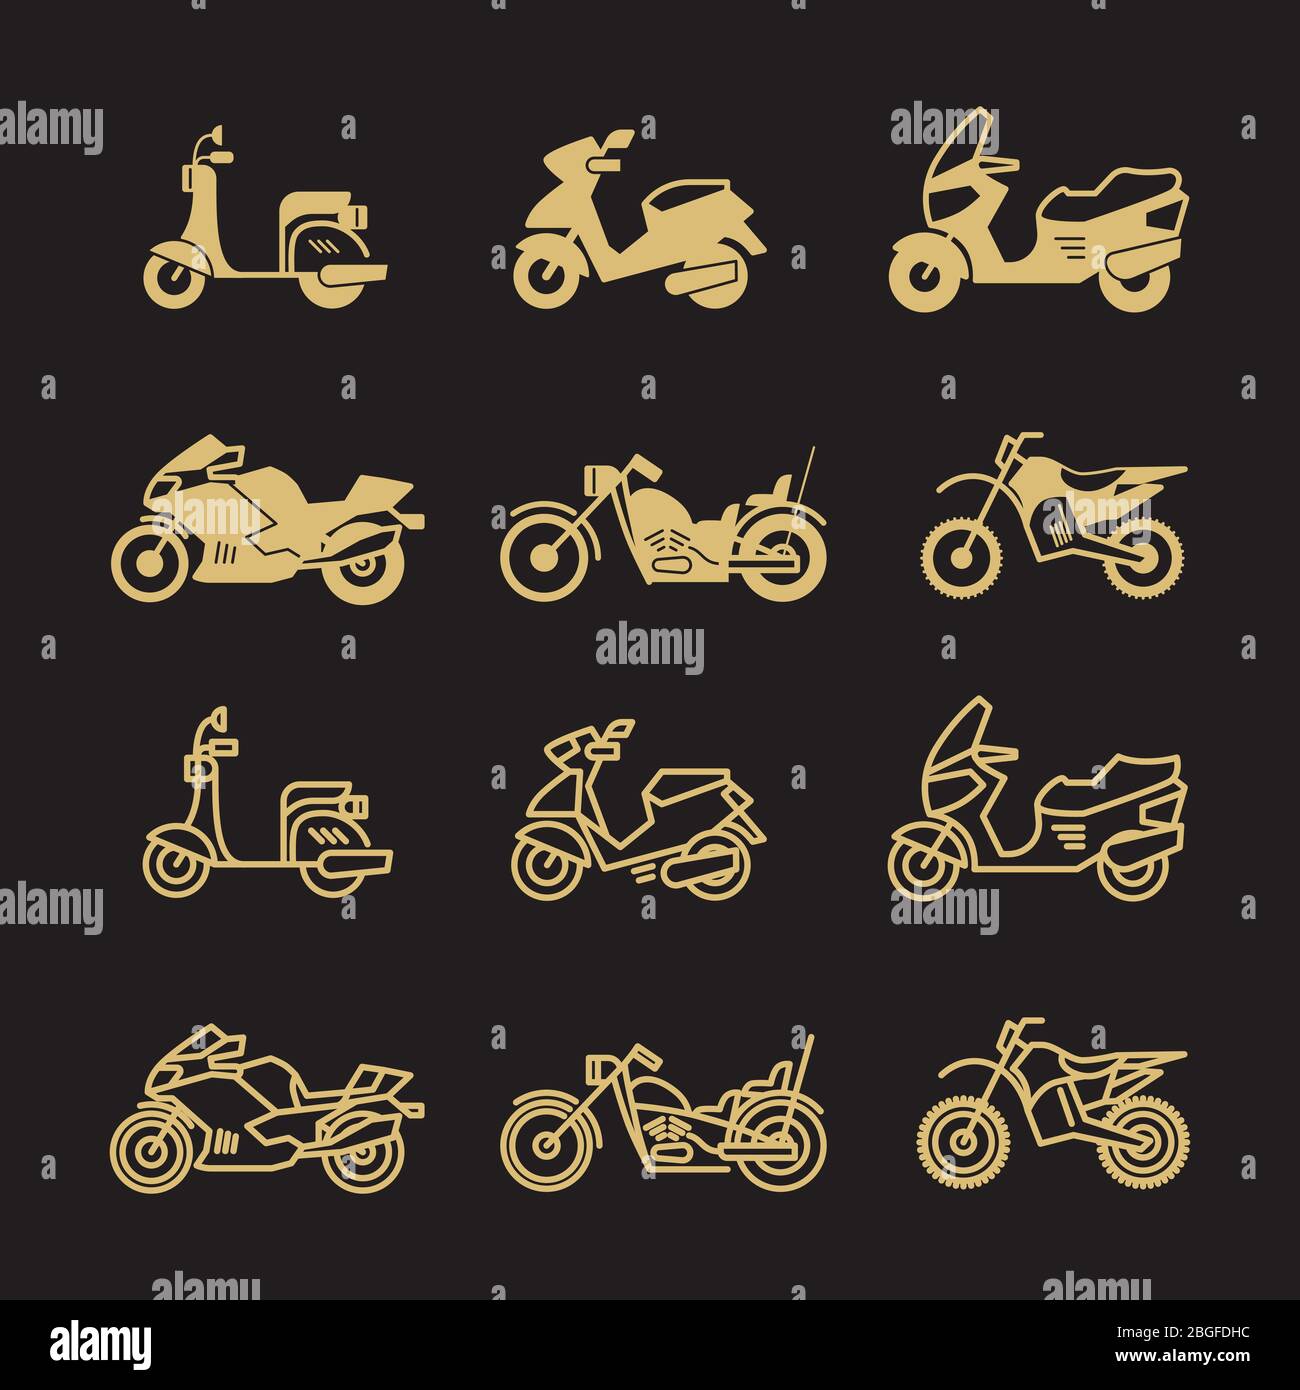 Vintage motorbike and motorcycle icons set isolated on black background. Vector illustration Stock Vector